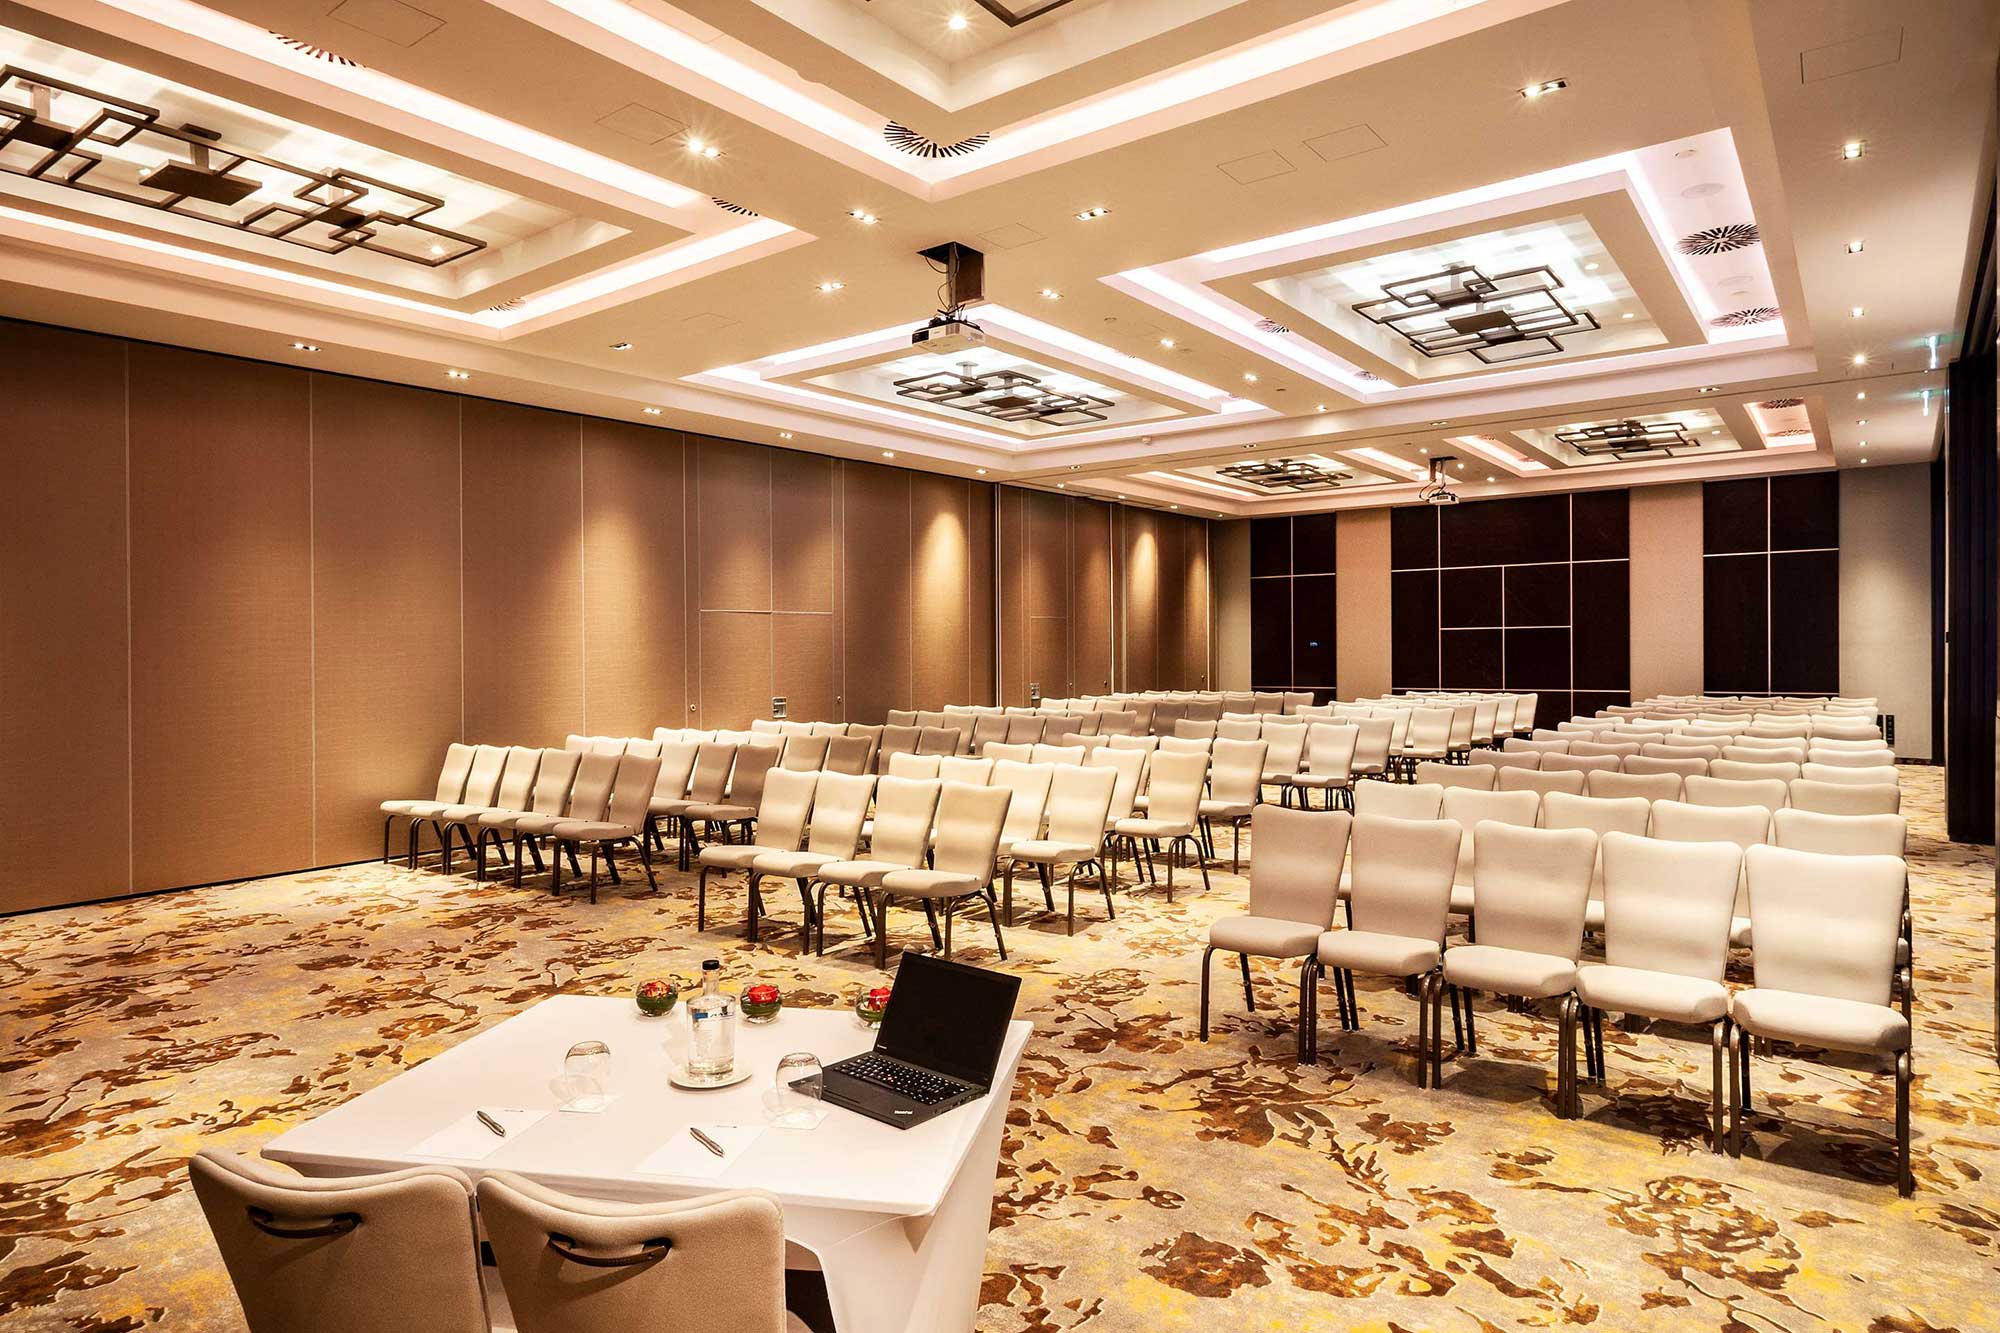 Using Event Intelligence, I was able to discover an event in a nearby major venue, where I knew the organiser from before. Thanks to Event Intelligence and with only 2 phone calls, we managed to bring in a total of close to 200 room nights in room blocks.